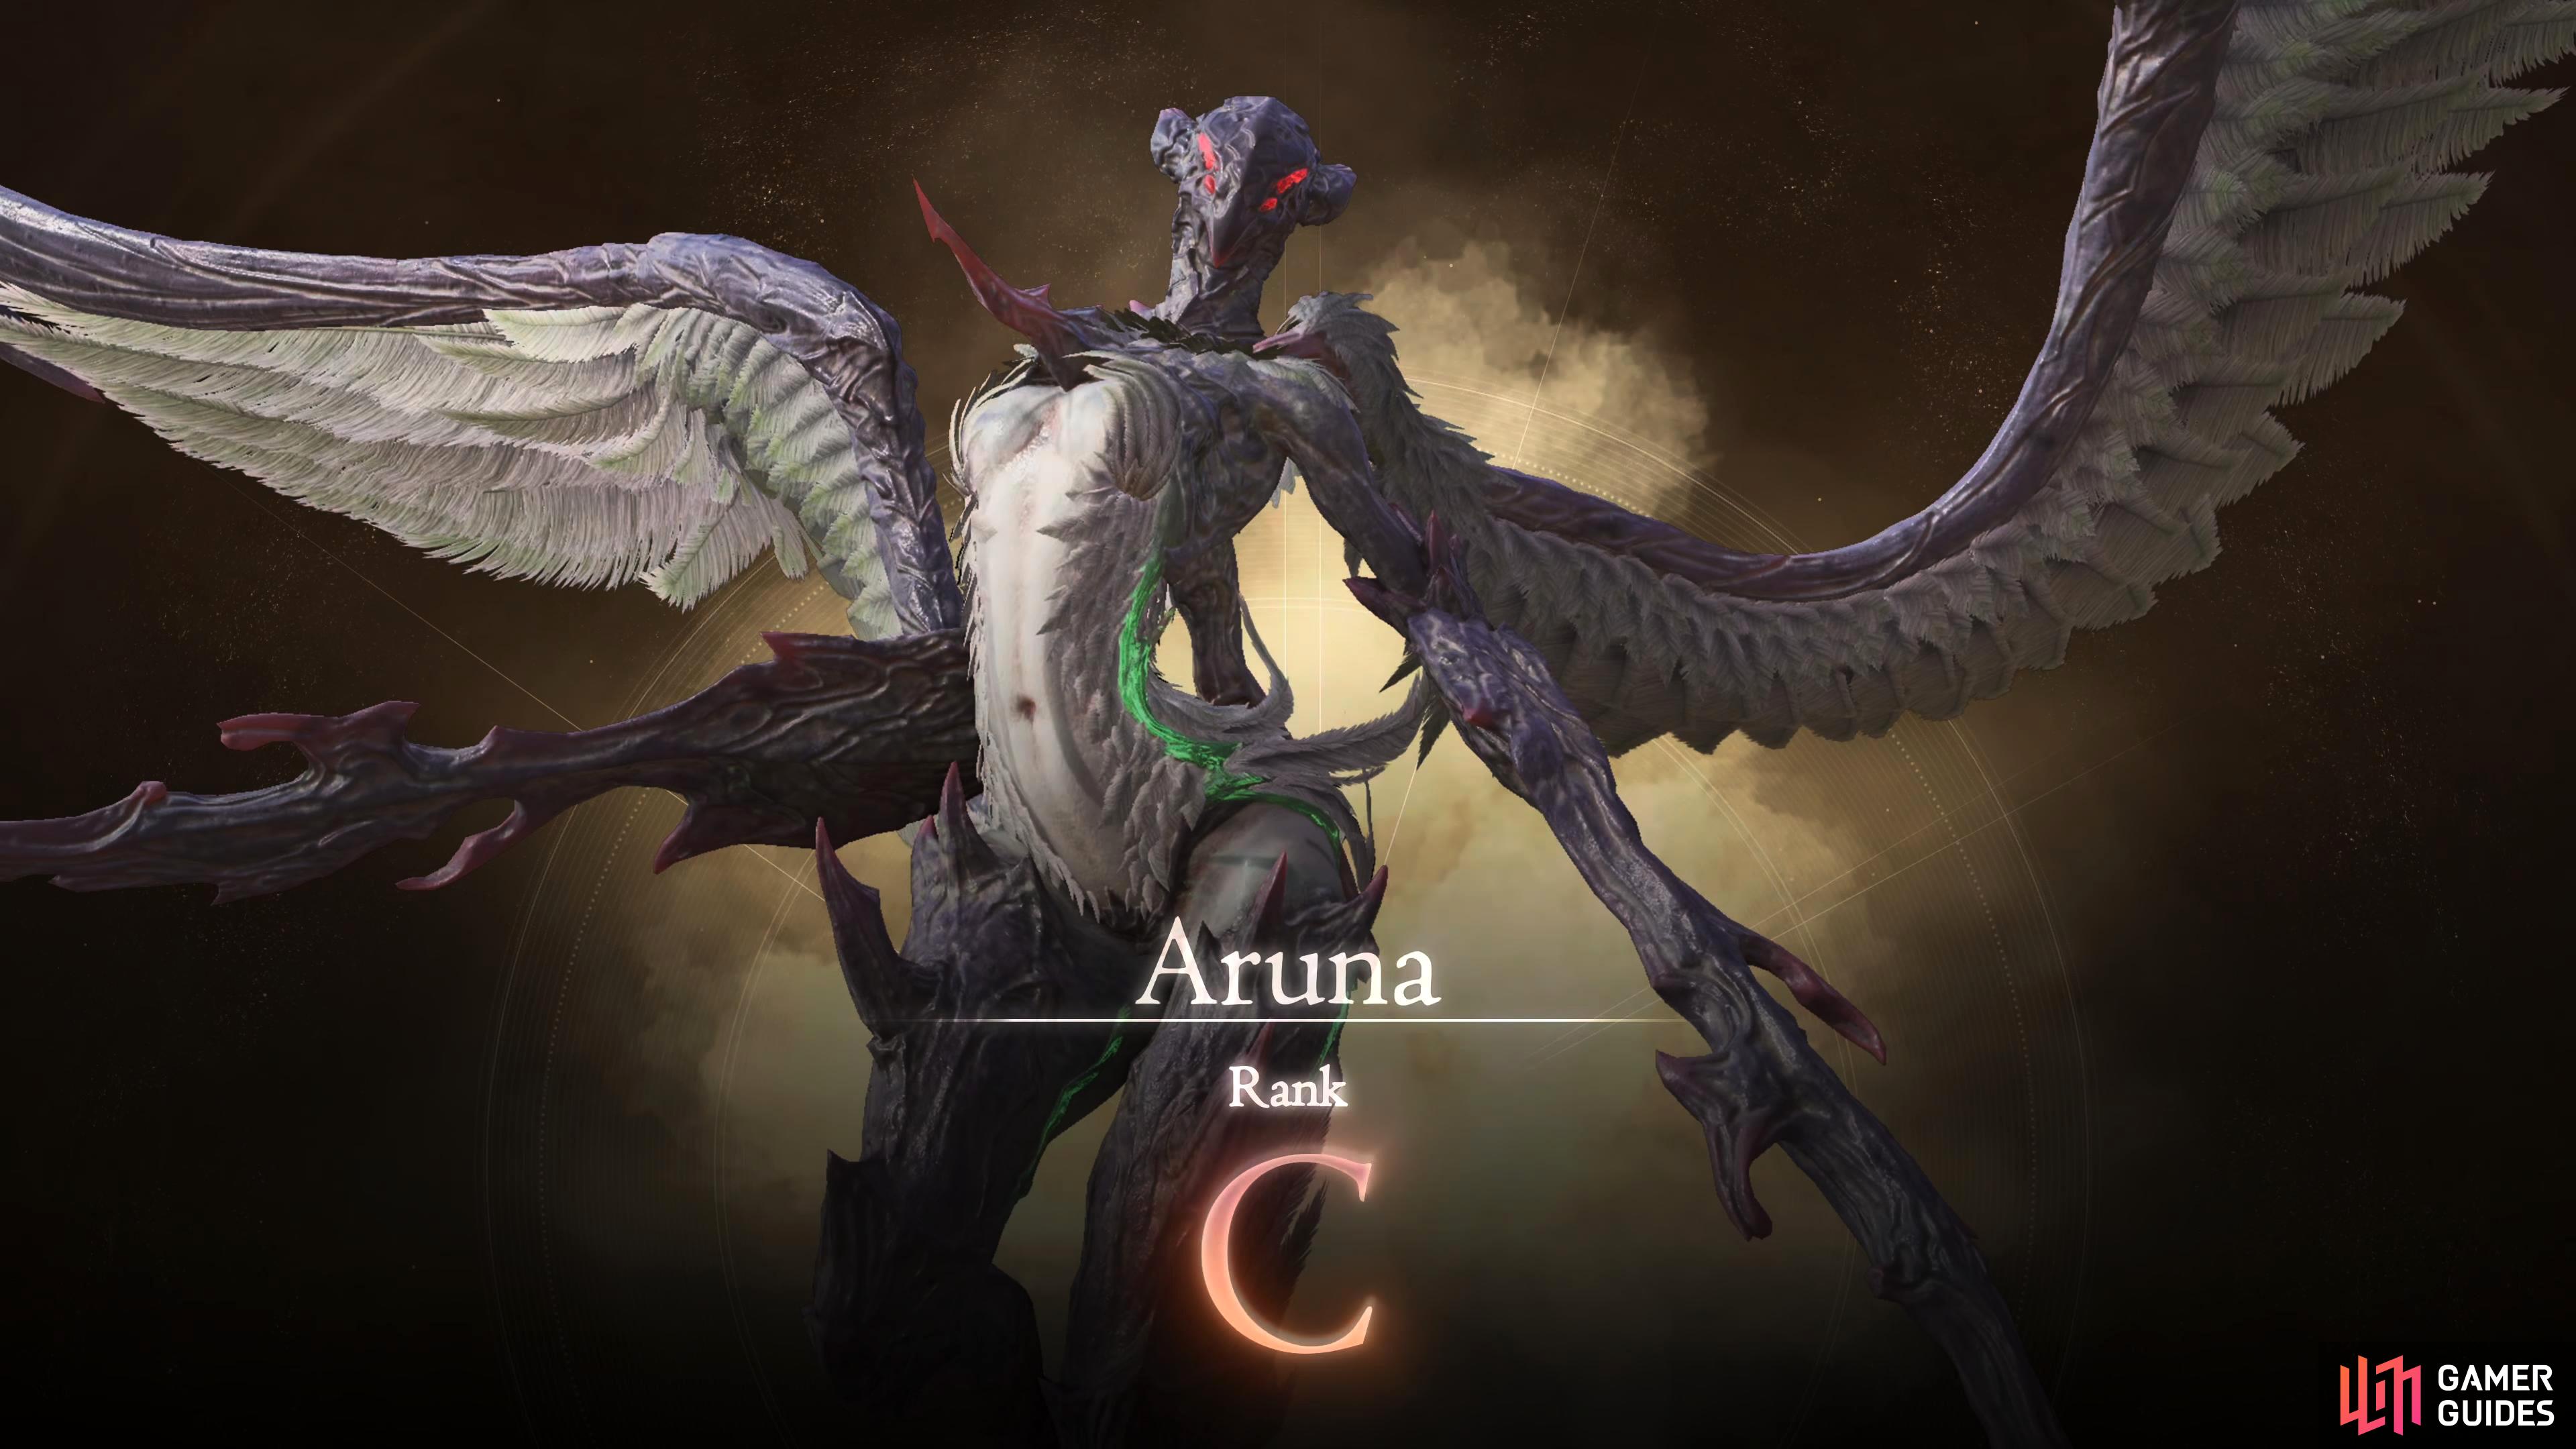 Aruna will be the second C Rank Hunt you’ll face.